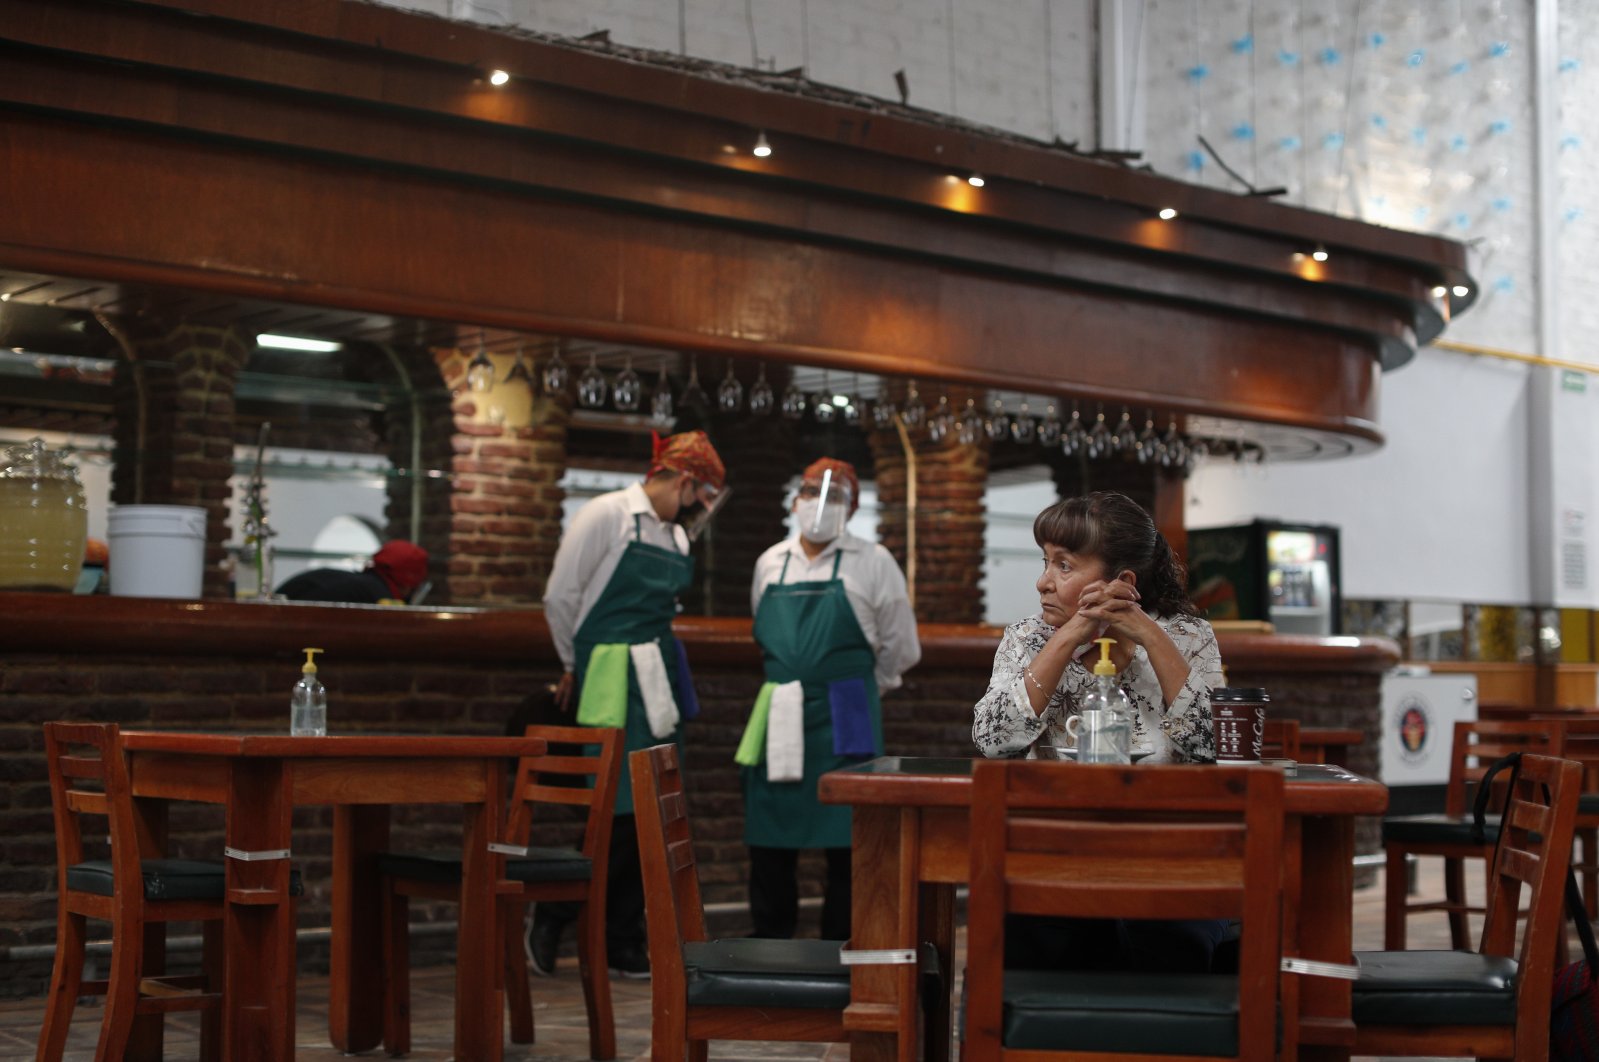 The very first customer sits at a table in Que Viva Mexico, a casual traditional food restaurant that opened its doors amid the ongoing coronavirus pandemic, in central Mexico City, Sept. 1, 2020. (AP Photo)